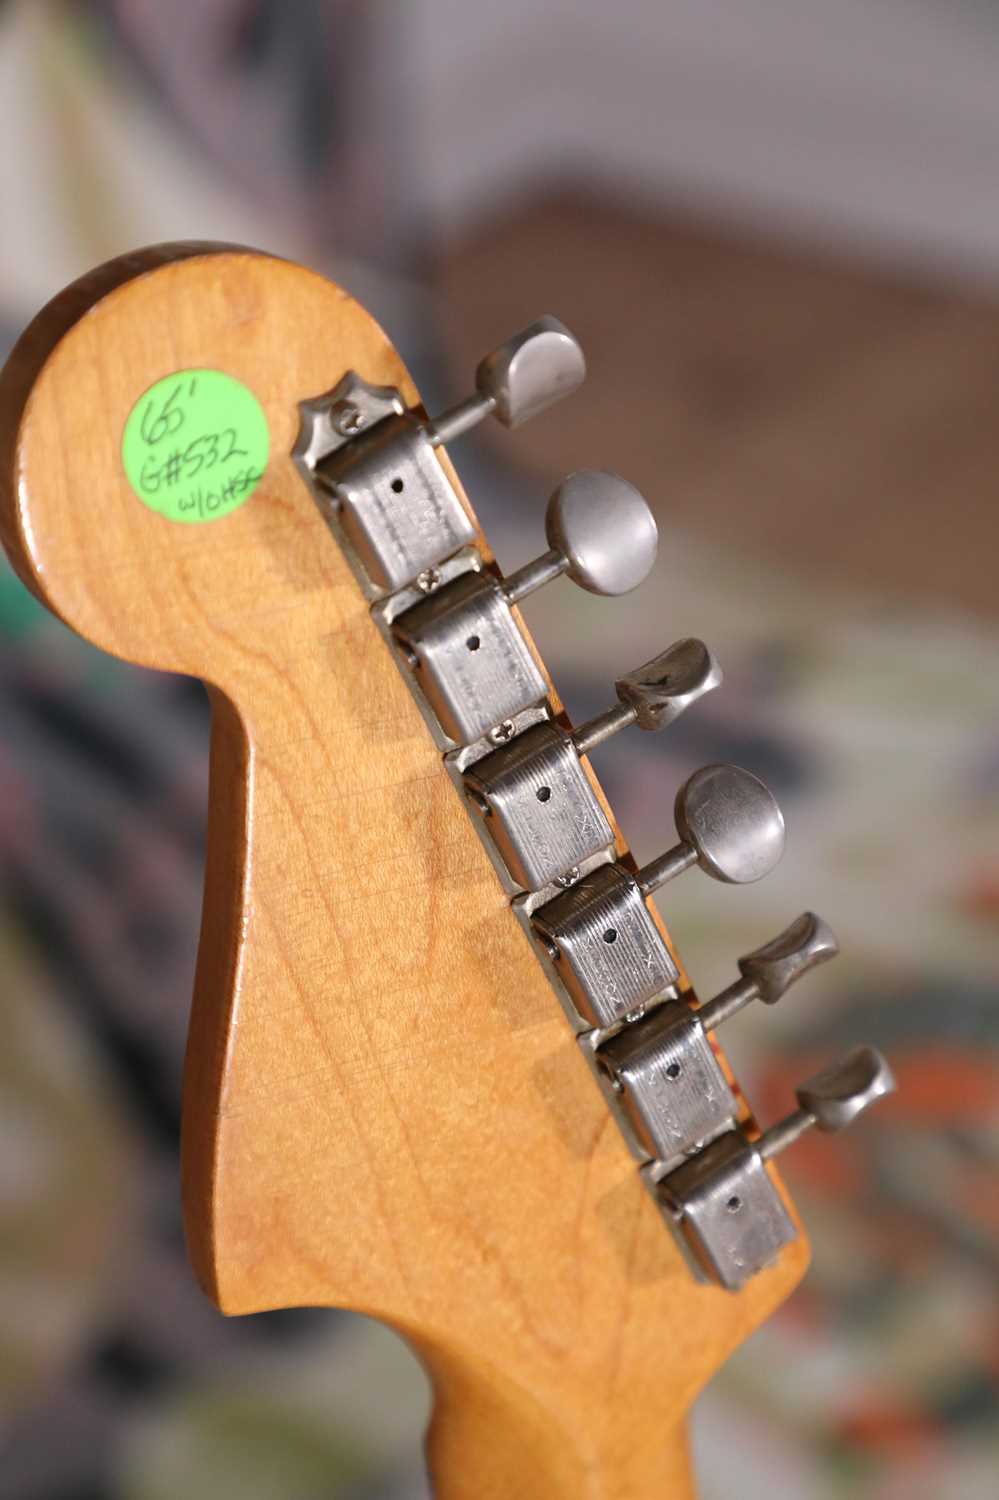 A 1965 Fender Jazzmaster electric guitar, - Image 8 of 16